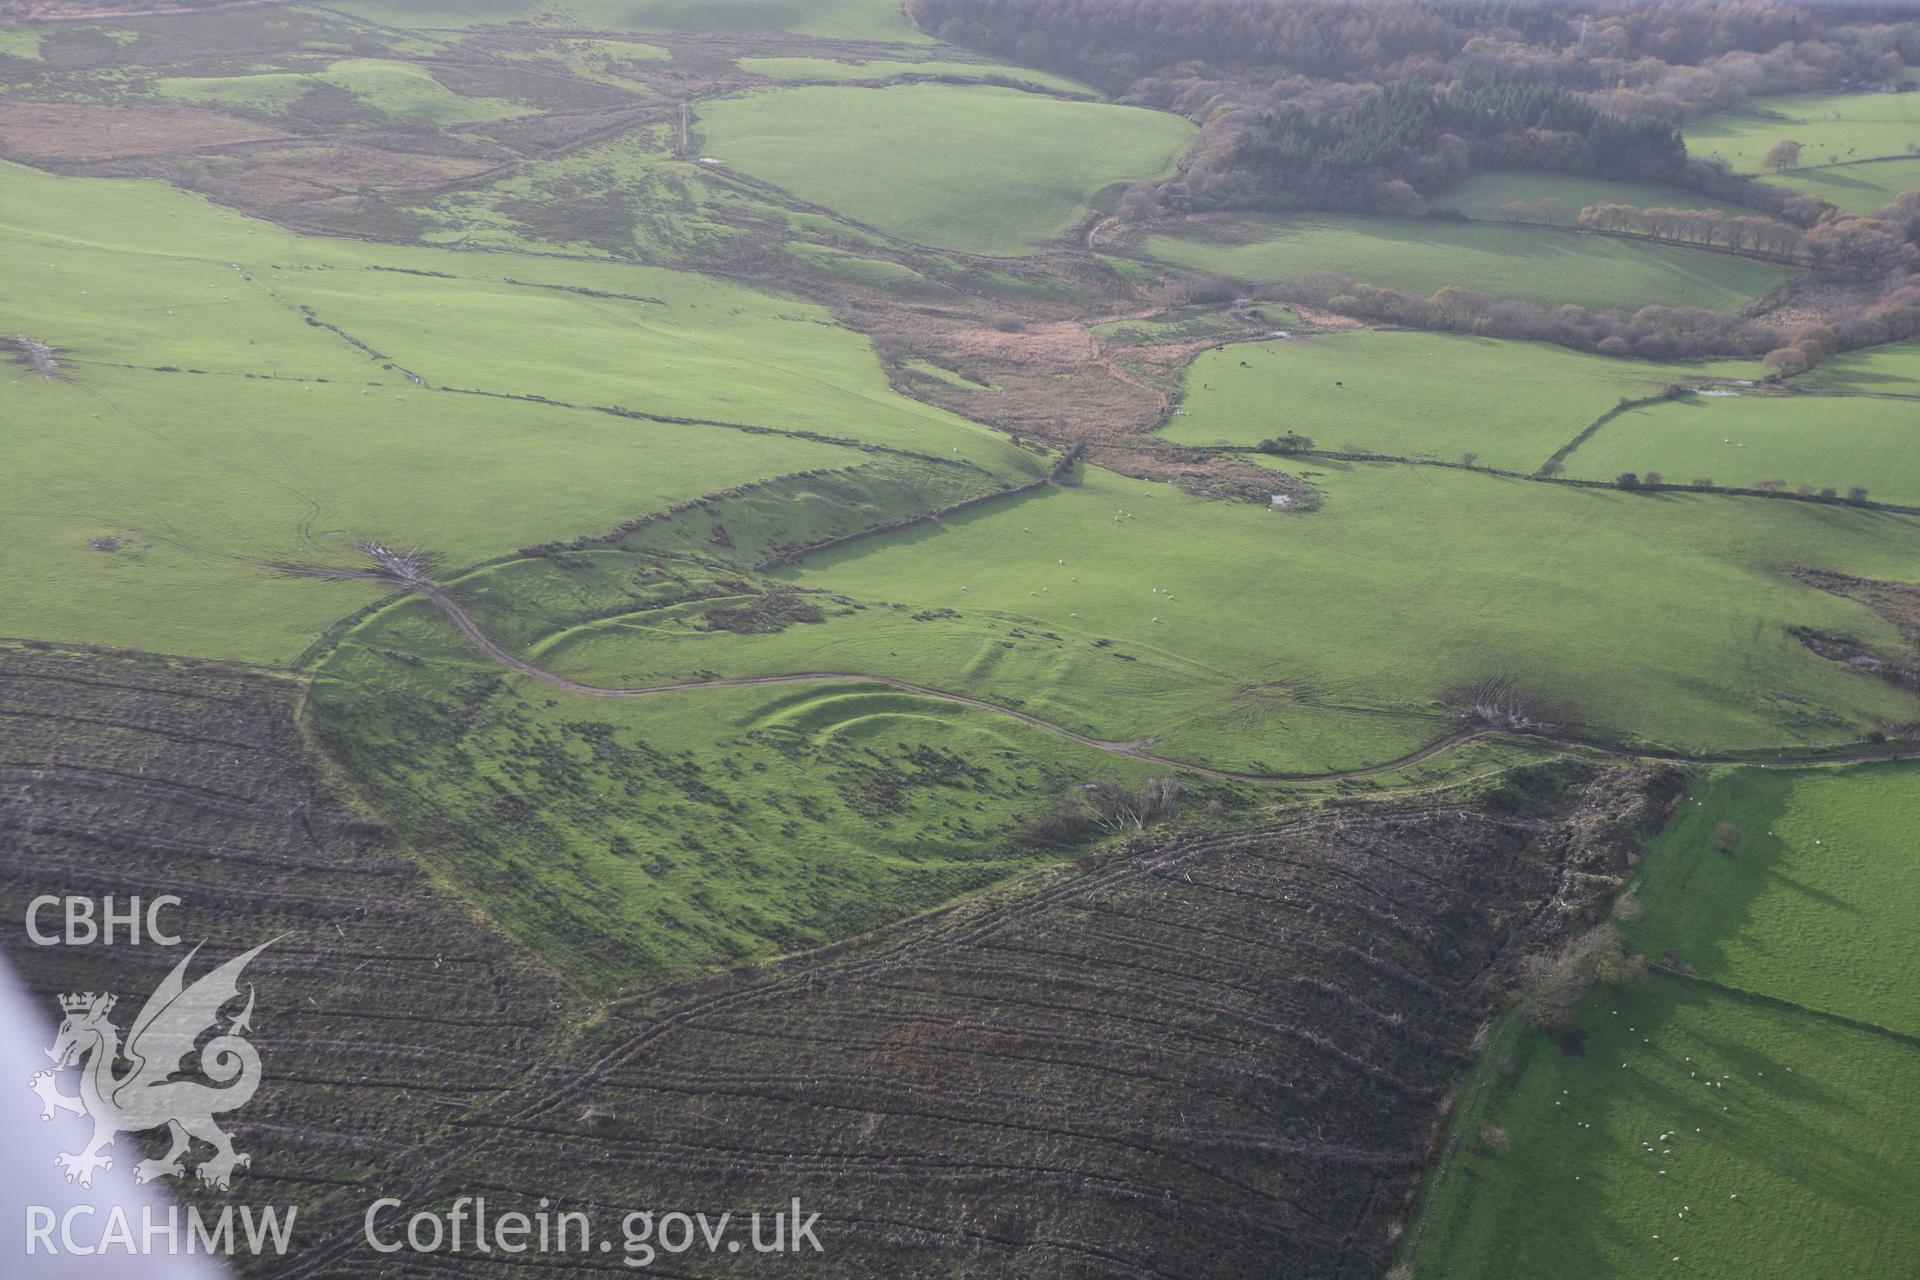 RCAHMW colour oblique photograph of Gaer Fawr. Taken by Toby Driver on 17/11/2011.